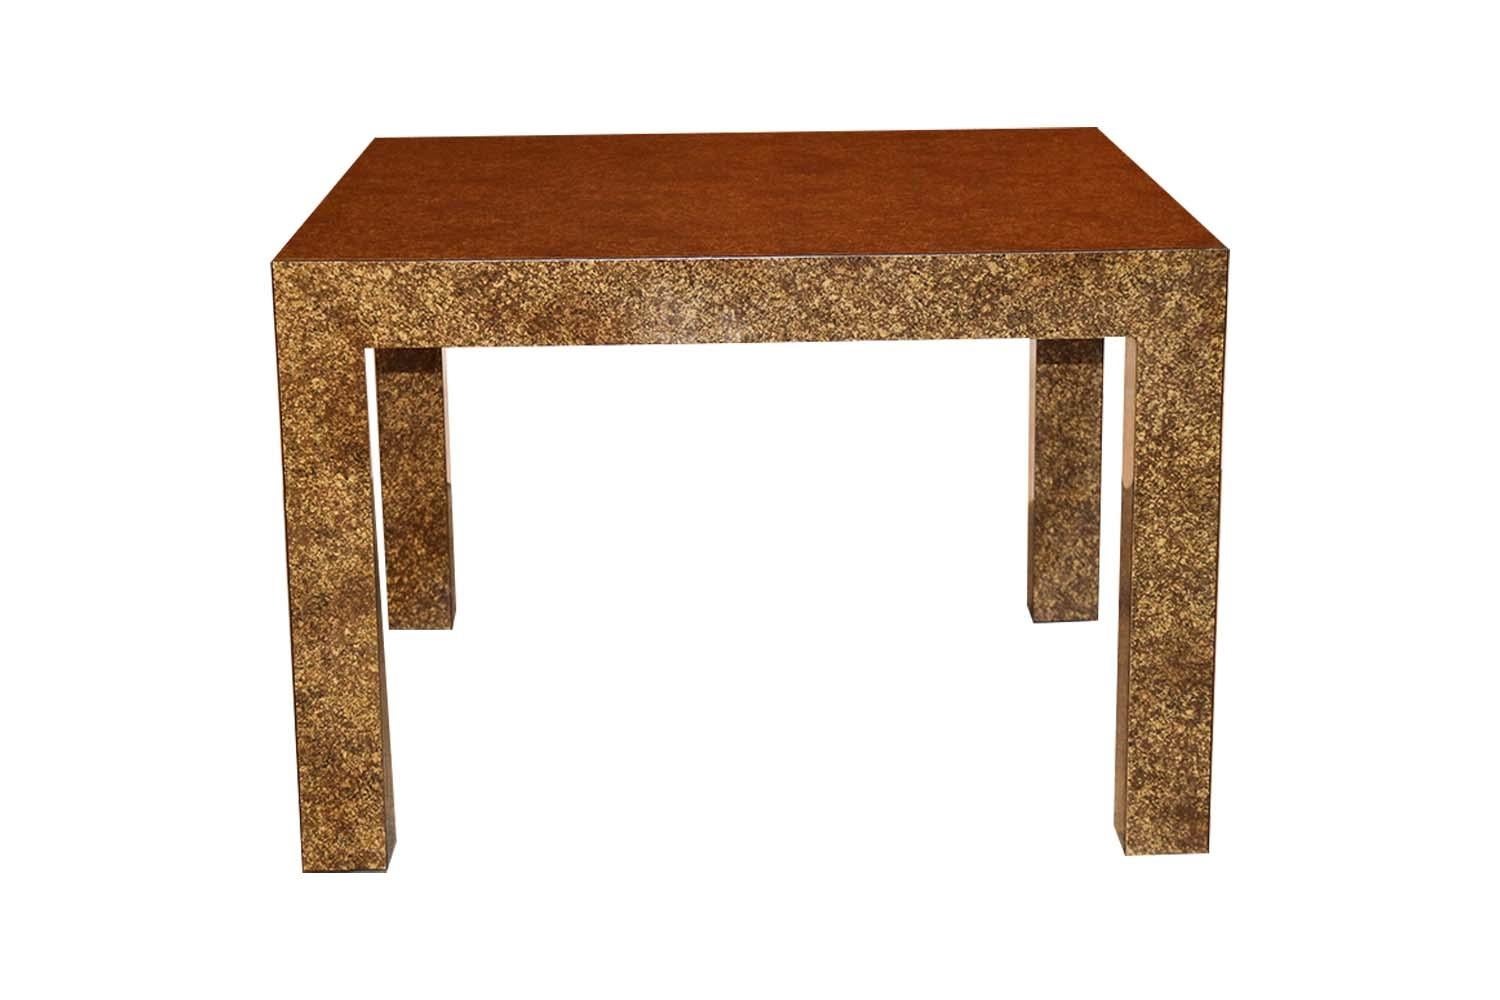 An elegant, sleek Parsons, style, coffee end/ game table, in the style of Milo Baughman, by Lane. Features faux tortoise shell oil drip finish stylish striking design on the square table top showcasing the faux tortoiseshell painted finish. Finely